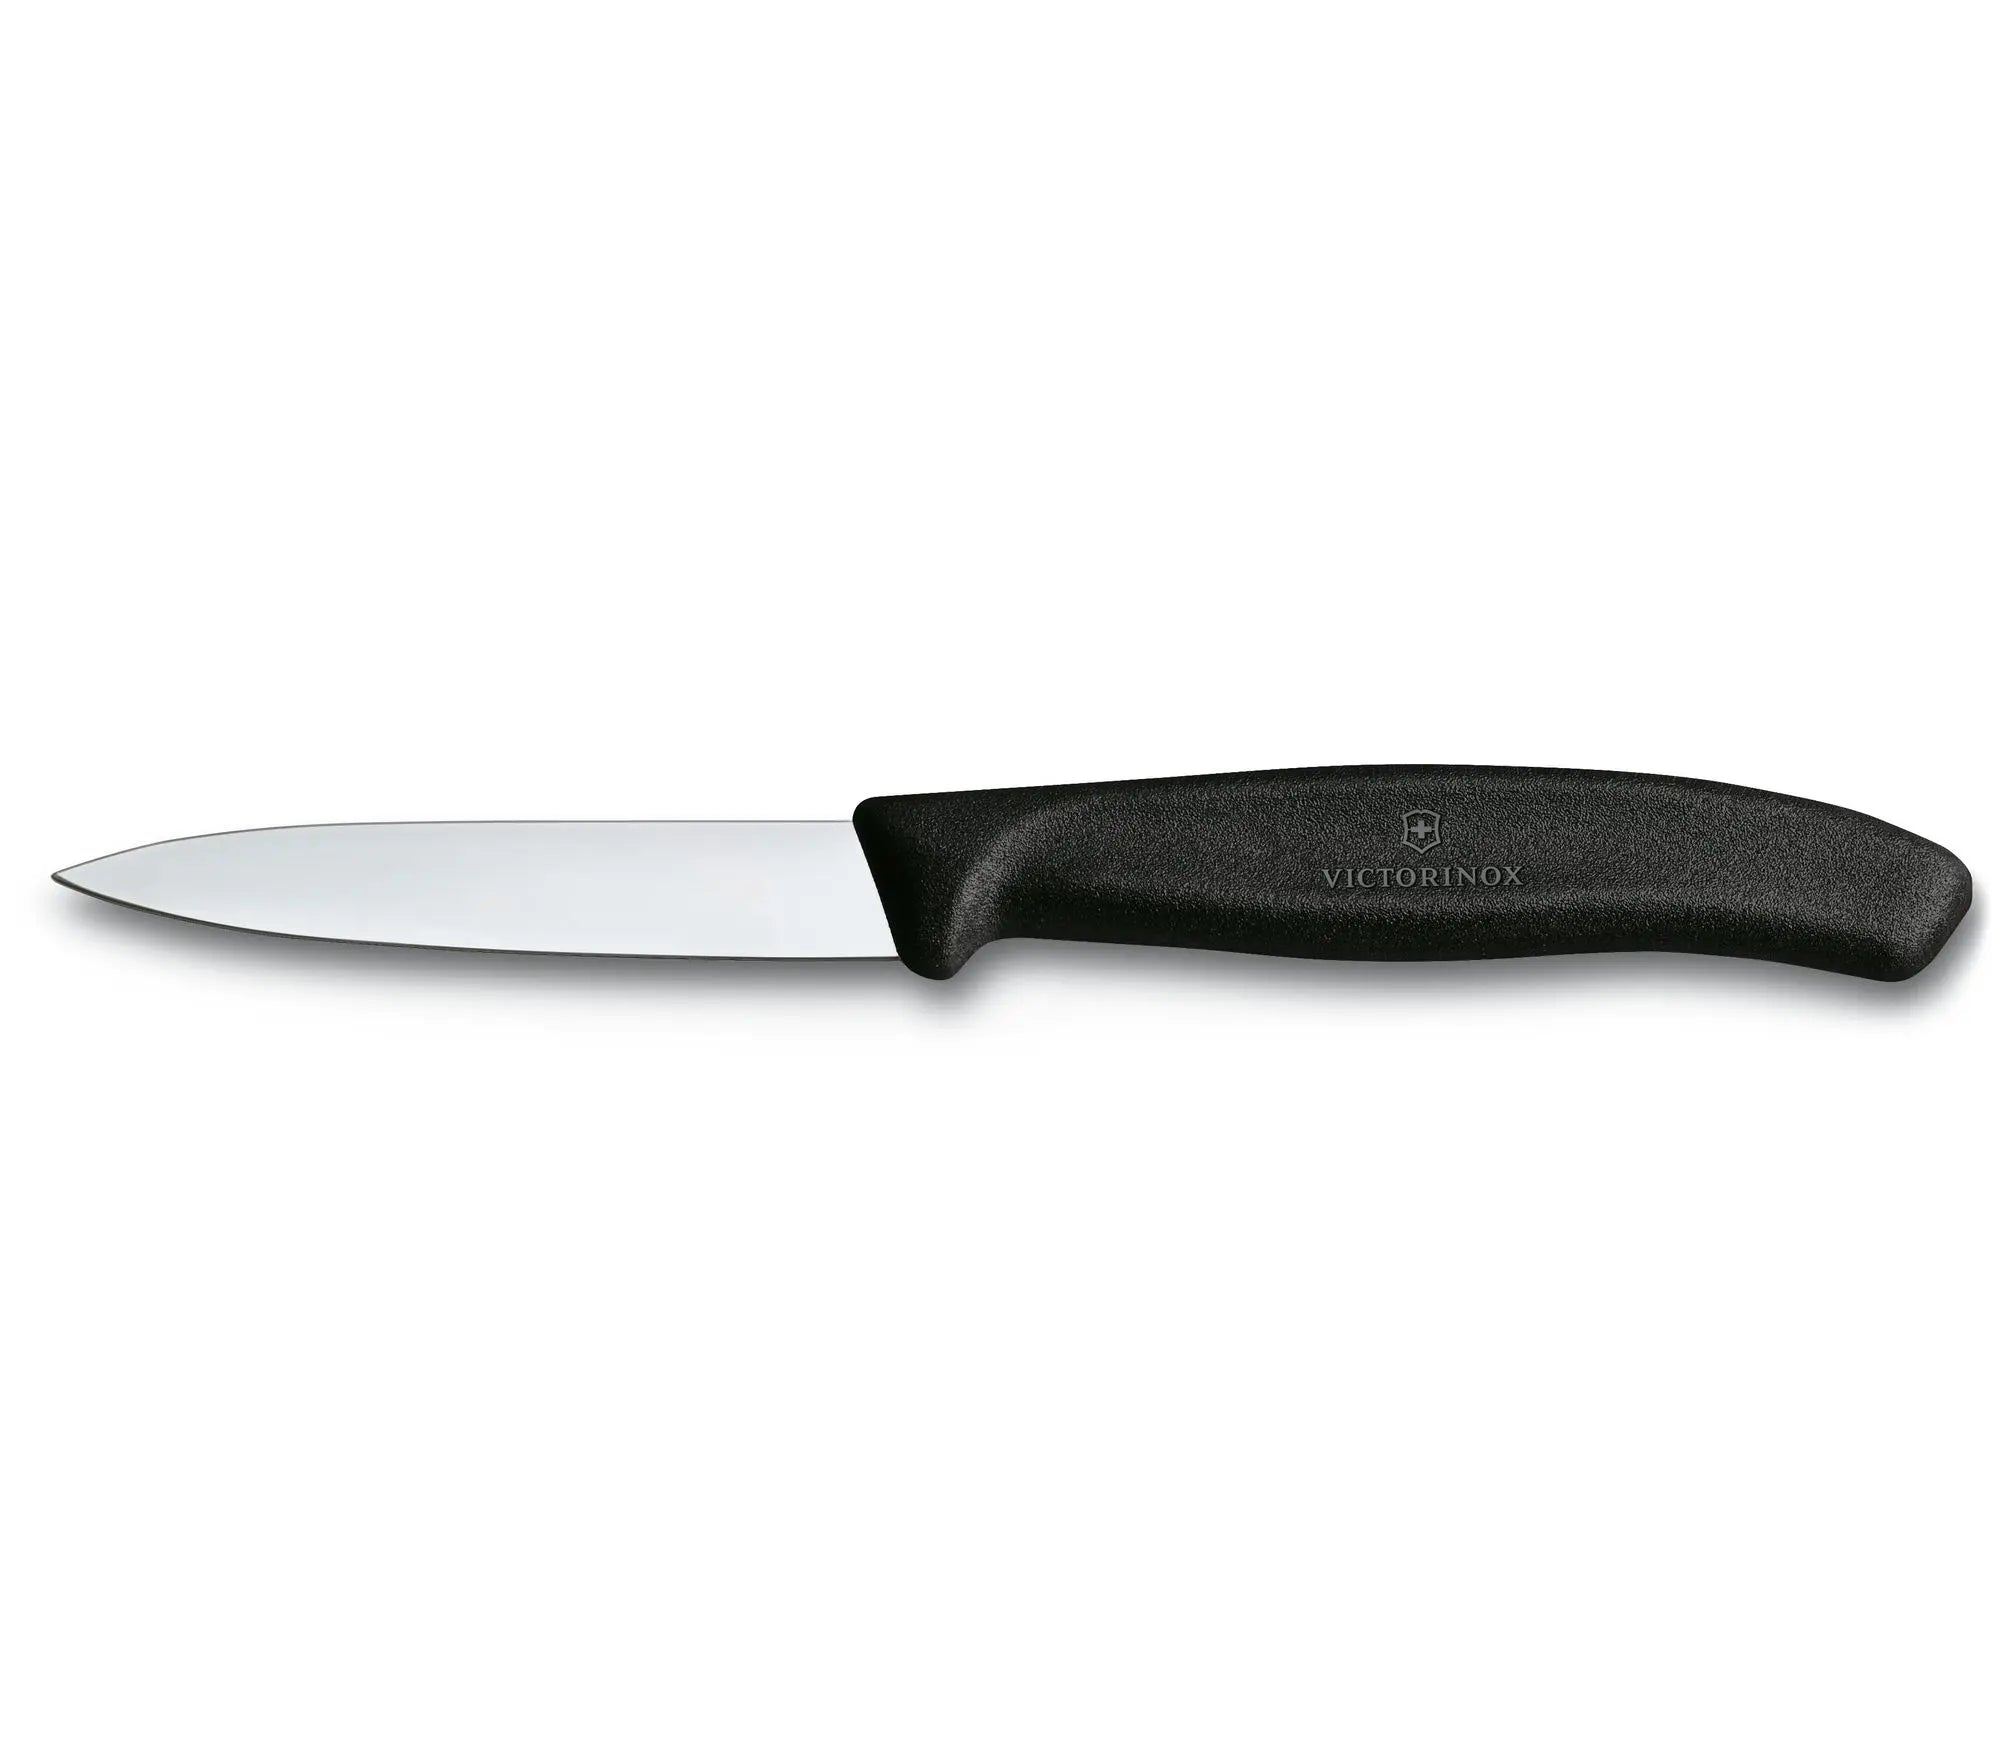 Victroinox Swiss Classic Paring Knife Pointed Tip - Black